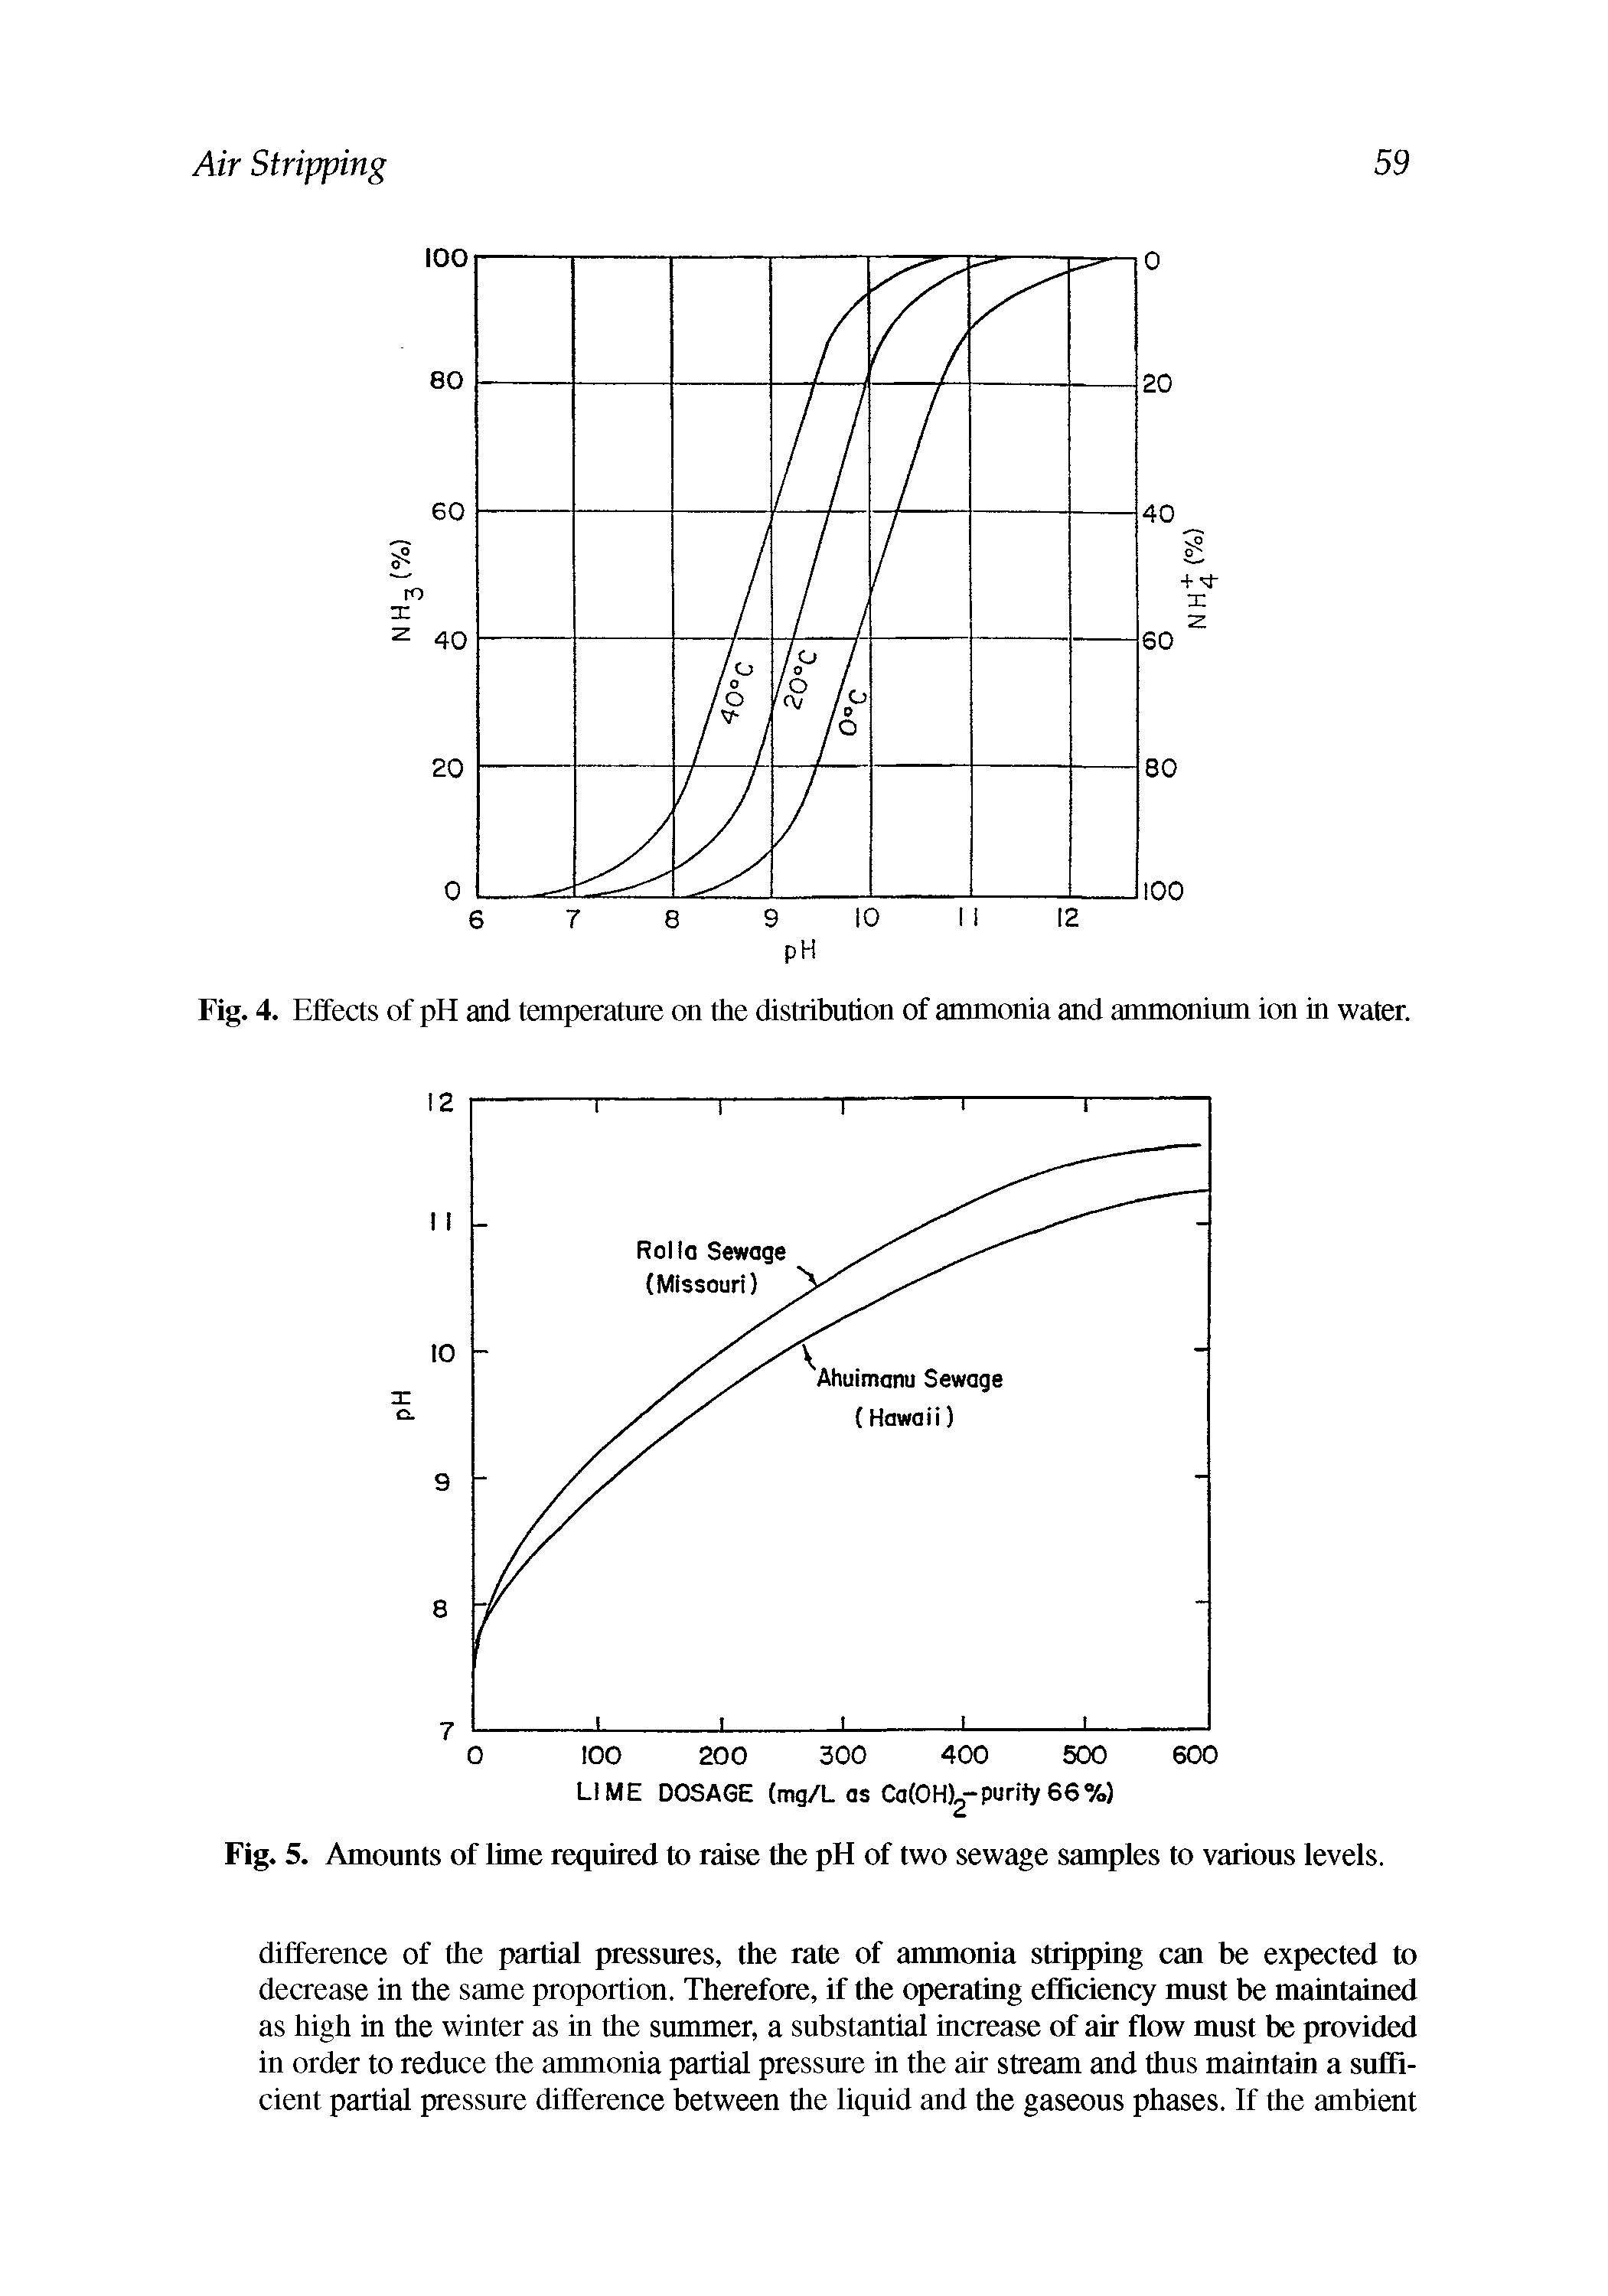 Fig. 5. Amounts of lime required to raise the pH of two sewage samples to various levels.